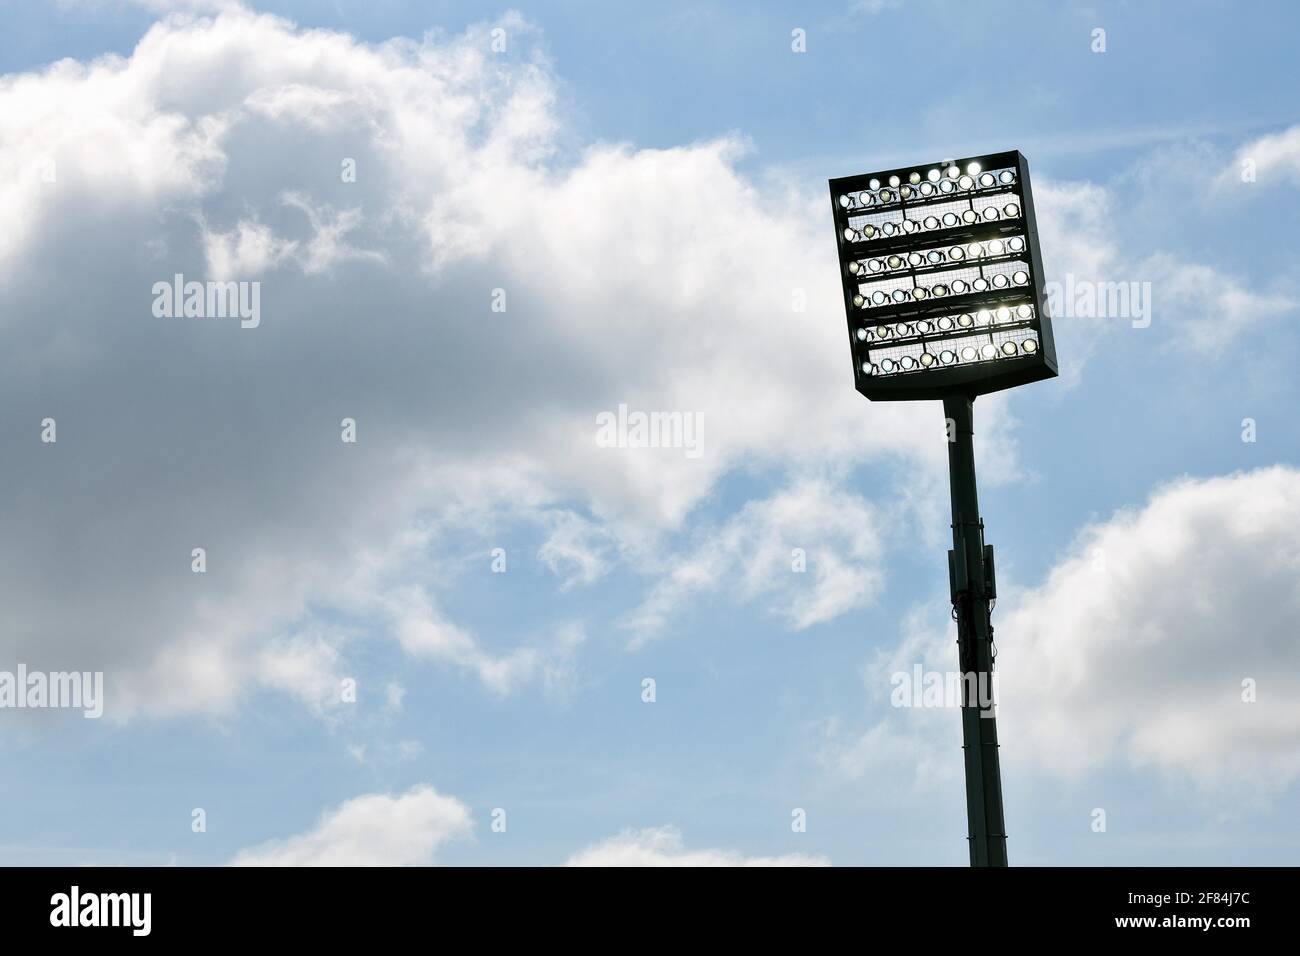 Floodlight mast switched on in front of blue sky with clouds, Bochum, Germany Stock Photo